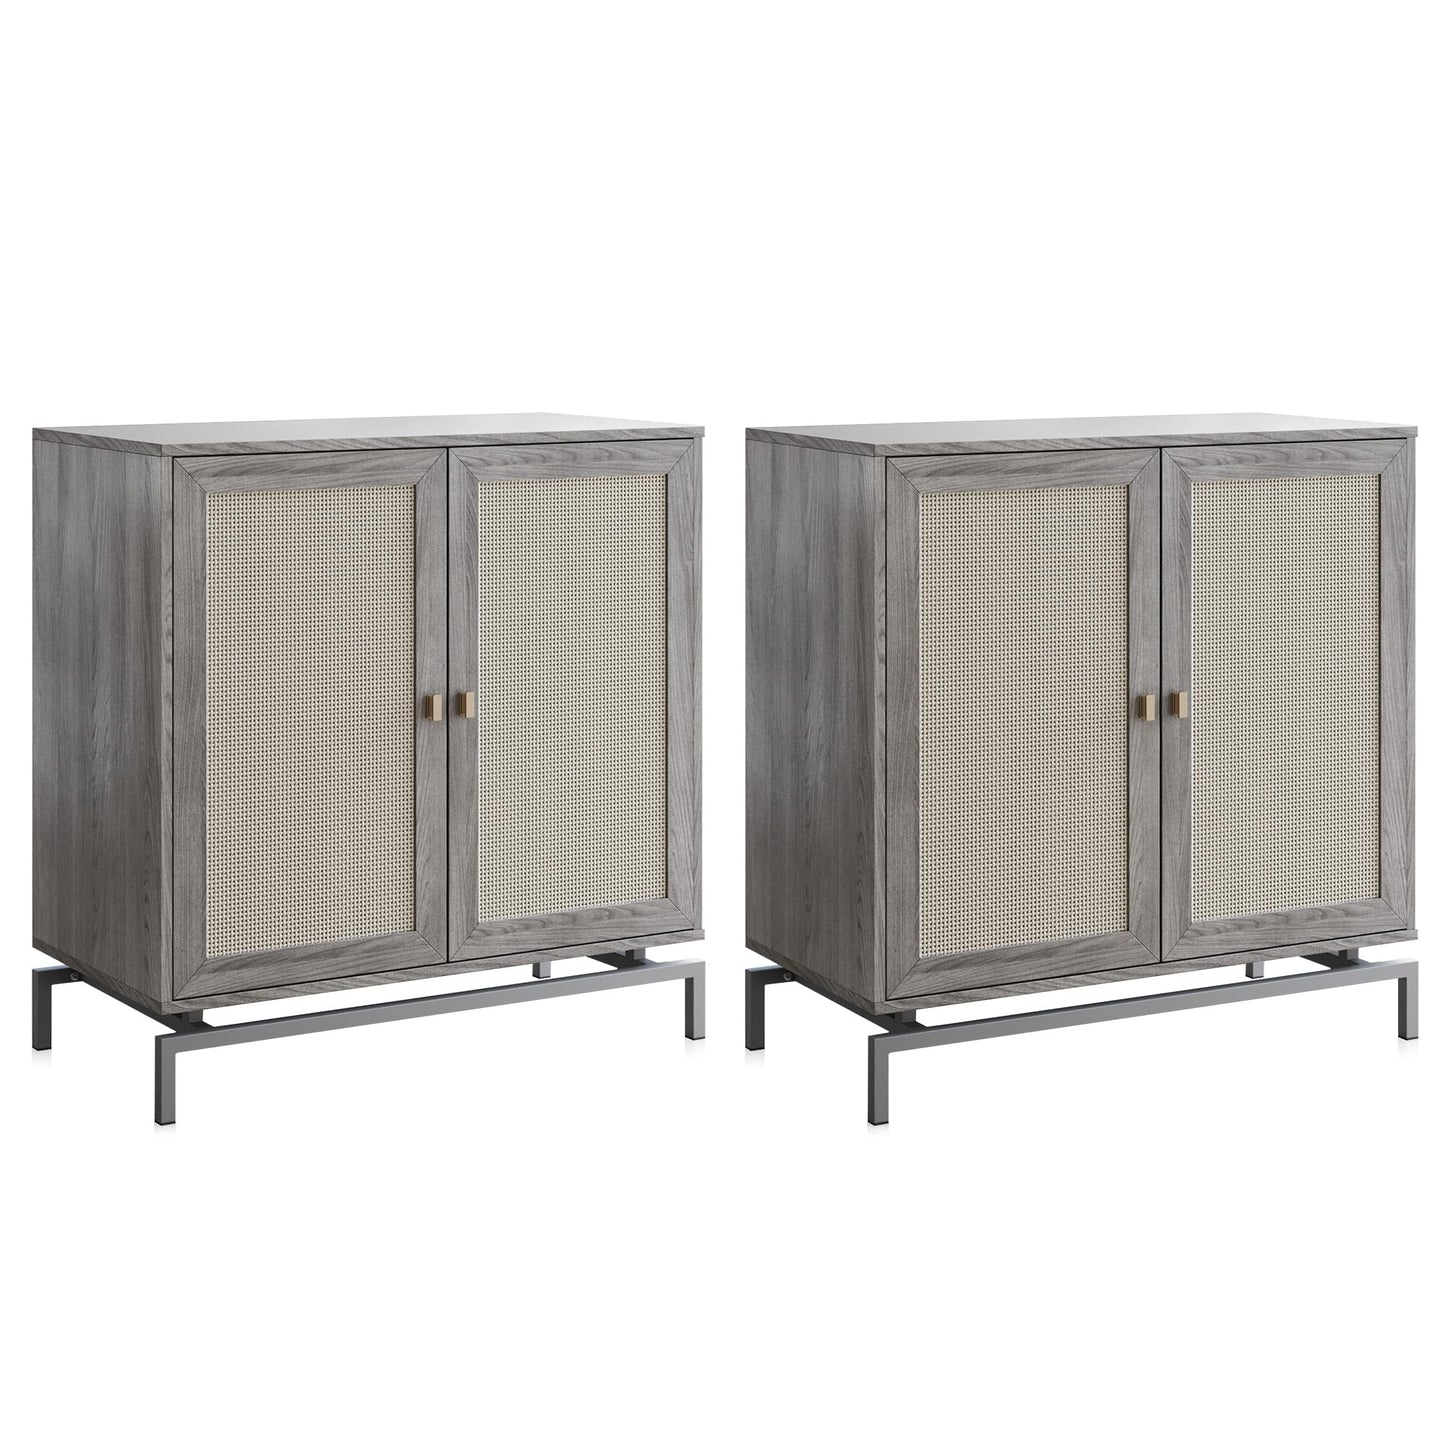 BELLEZE Sideboard Buffet Cabinet Set of 2, Storage Cabinet with Rattan Doors, Buffet Table with Metal Base and Adjustable Shelves Accent Cabinet